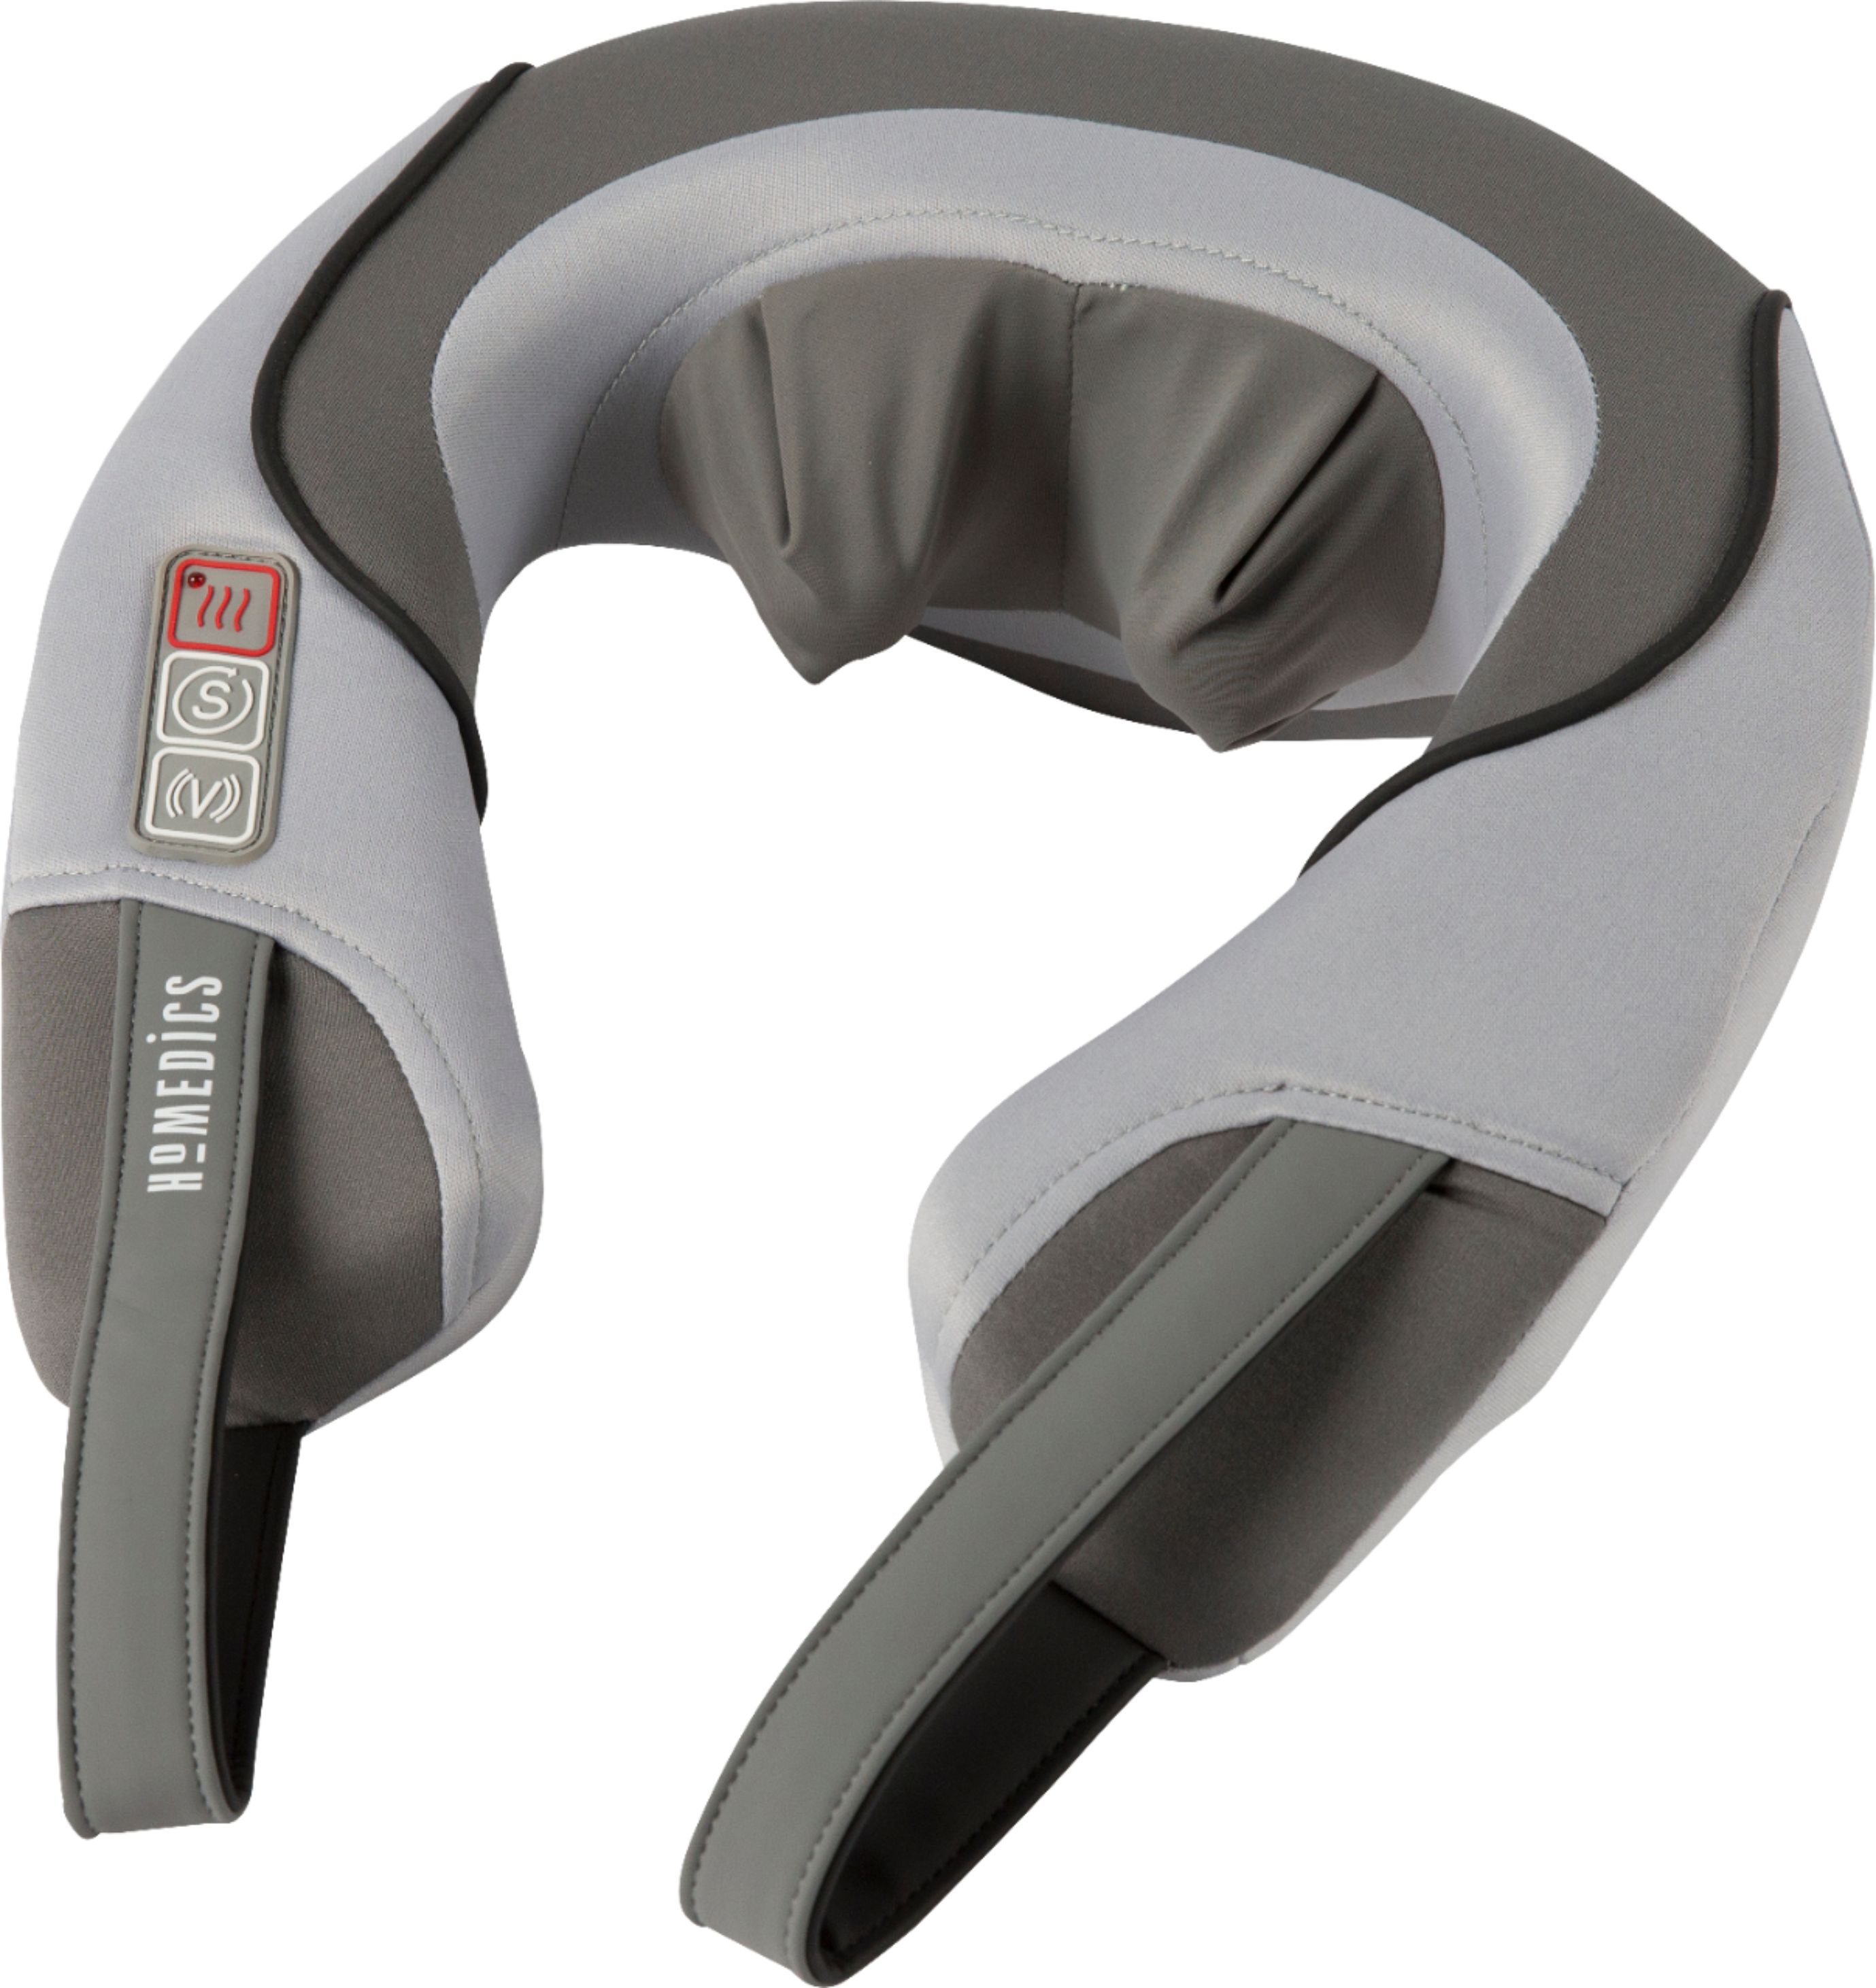 Homedics Shiatsu Neck And Shoulder Massager With Heat Gray Nms 375 Best Buy